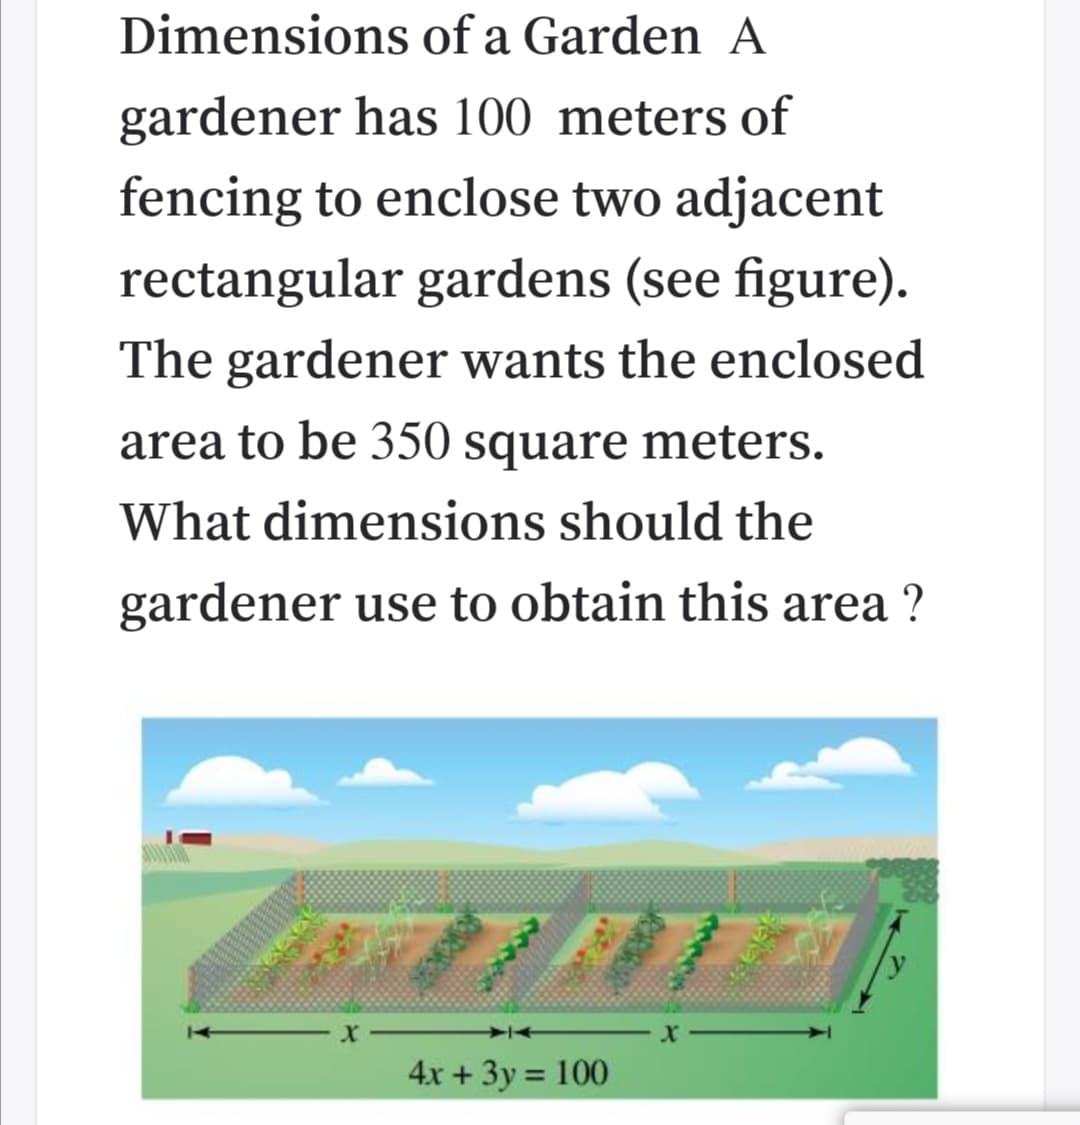 Dimensions of a Garden A
gardener has 100 meters of
fencing to enclose two adjacent
rectangular gardens (see figure).
The gardener wants the enclosed
area to be 350 square meters.
What dimensions should the
gardener use to obtain this area ?
4x + 3y = 100
%3D
